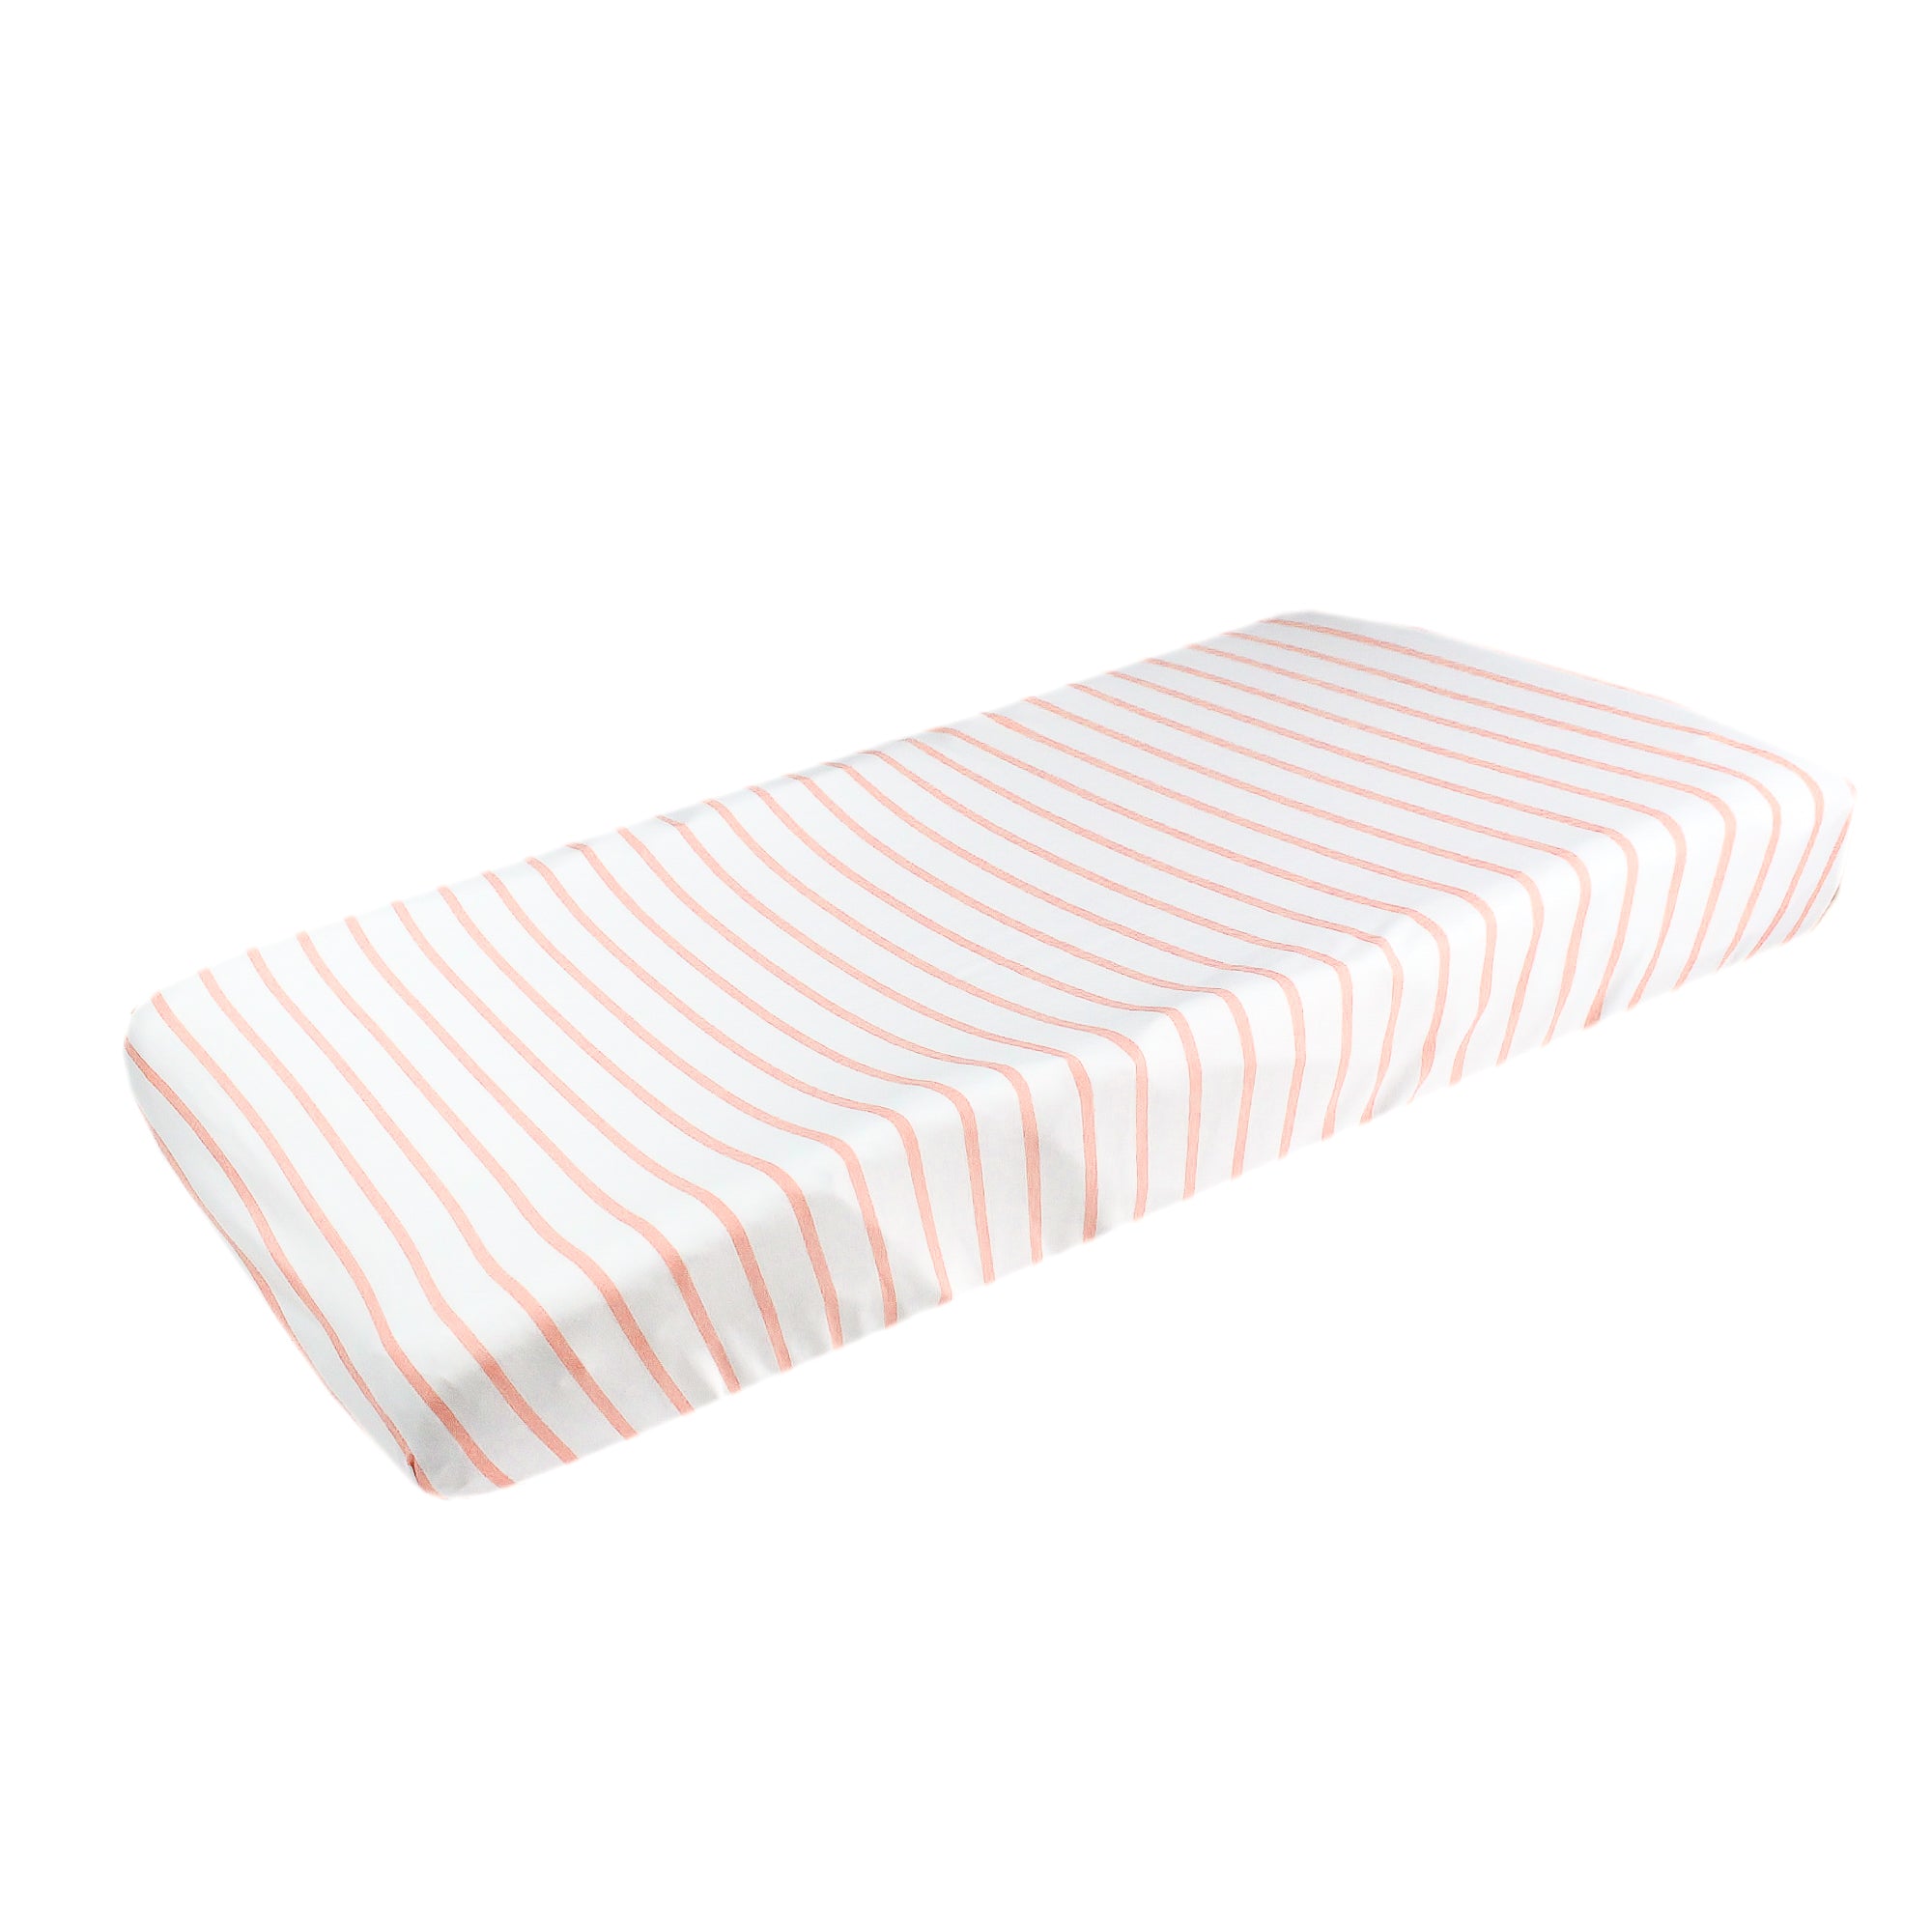 Premium Knit Diaper Changing Pad Cover - Lainey